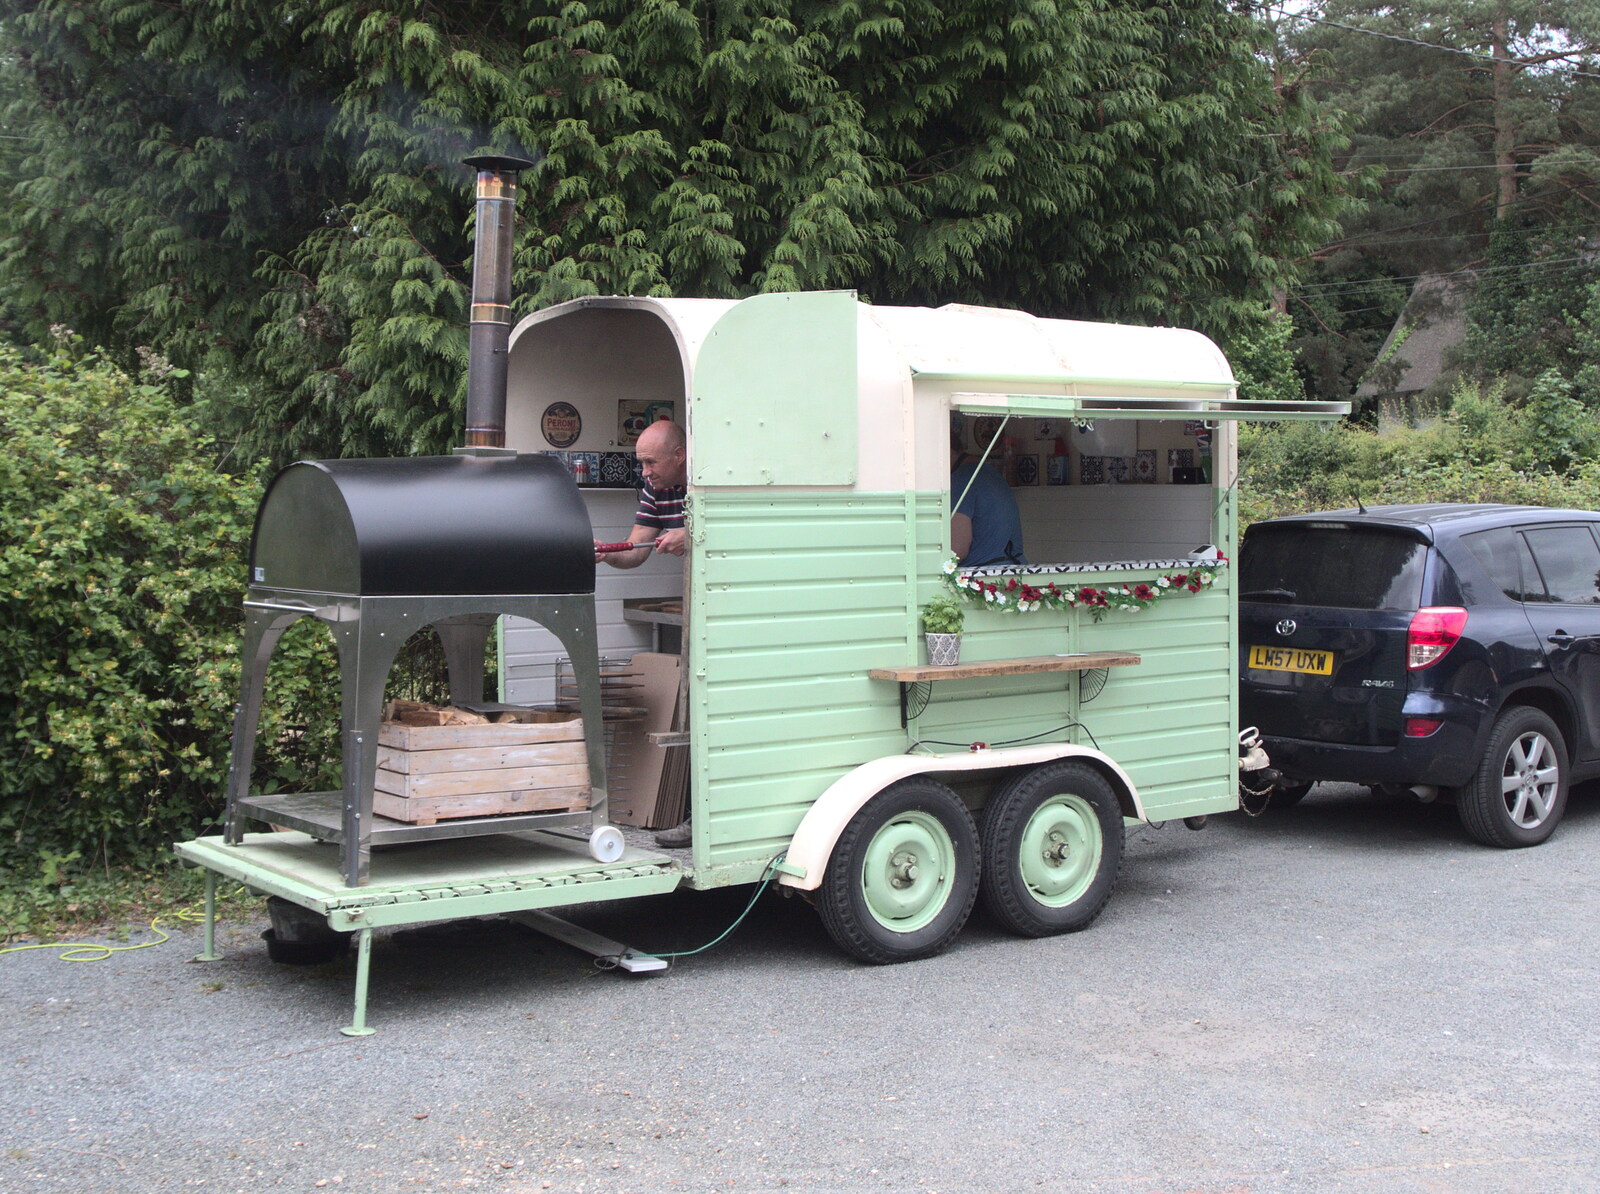 Wild Flour's pizza van is in the car park from Pizza at the Village Hall, Brome, Suffolk - 24th June 2022